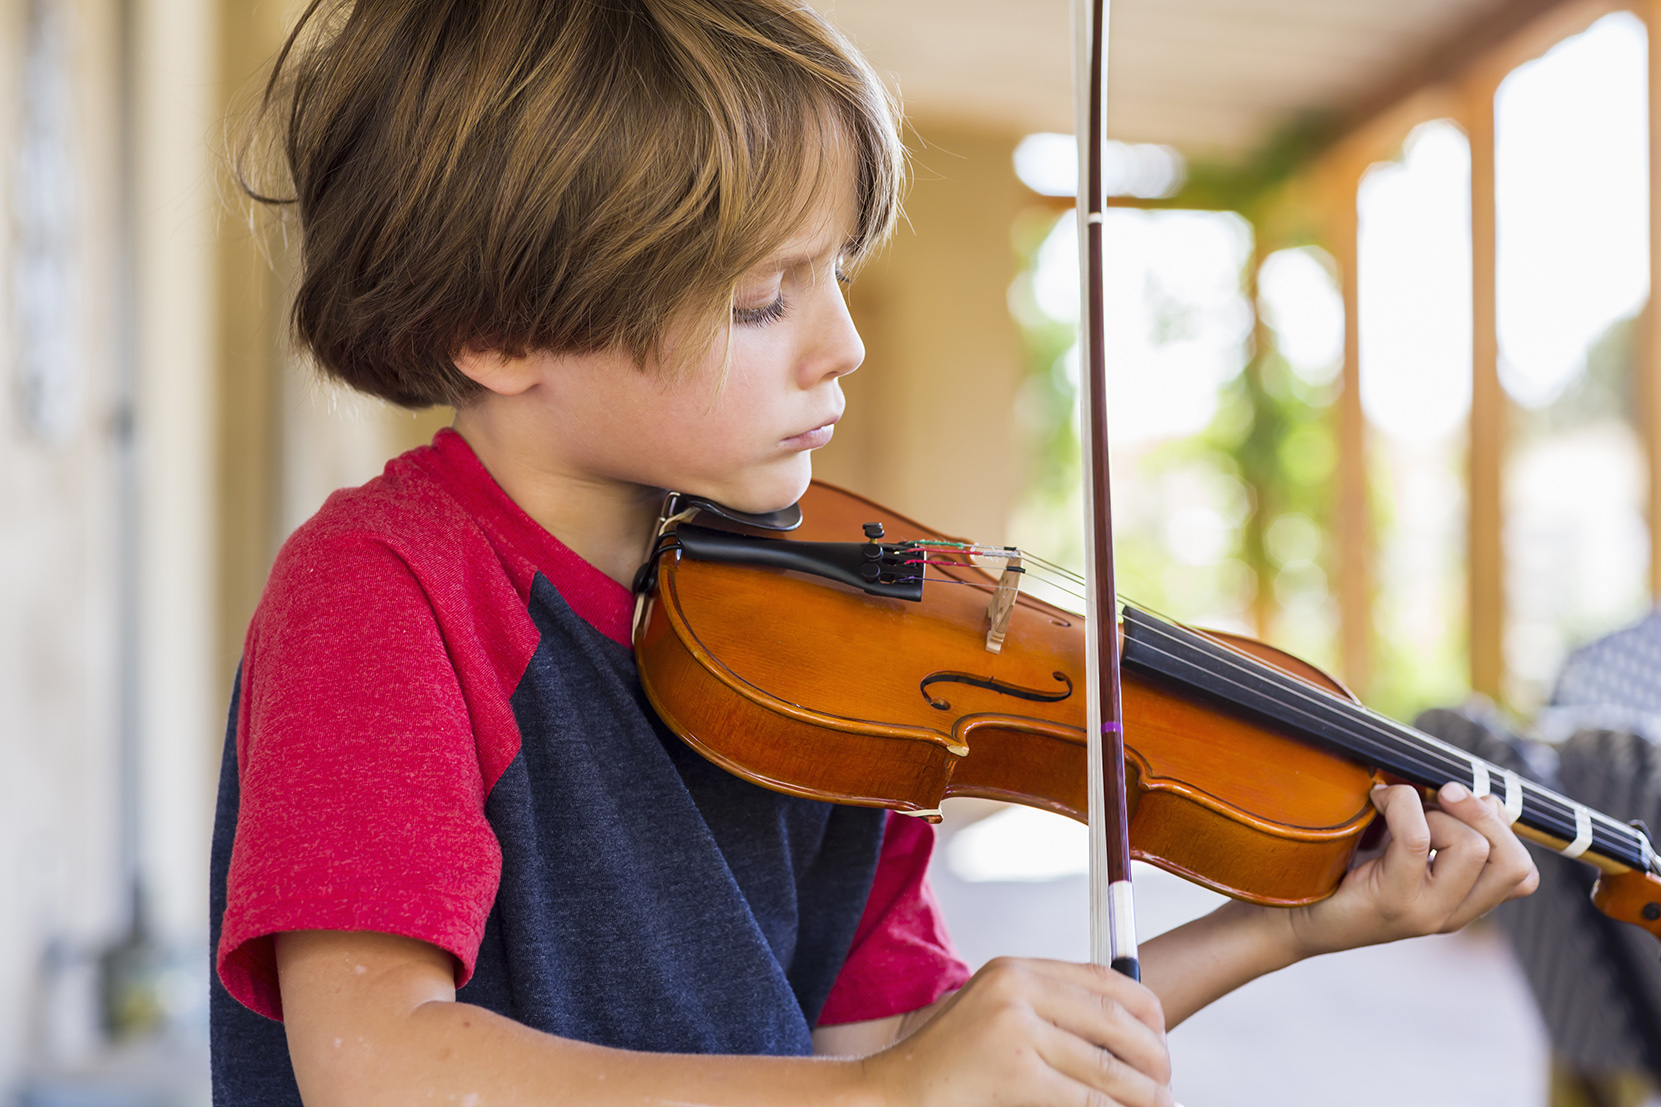 6 year old boy playing violin outside in garden